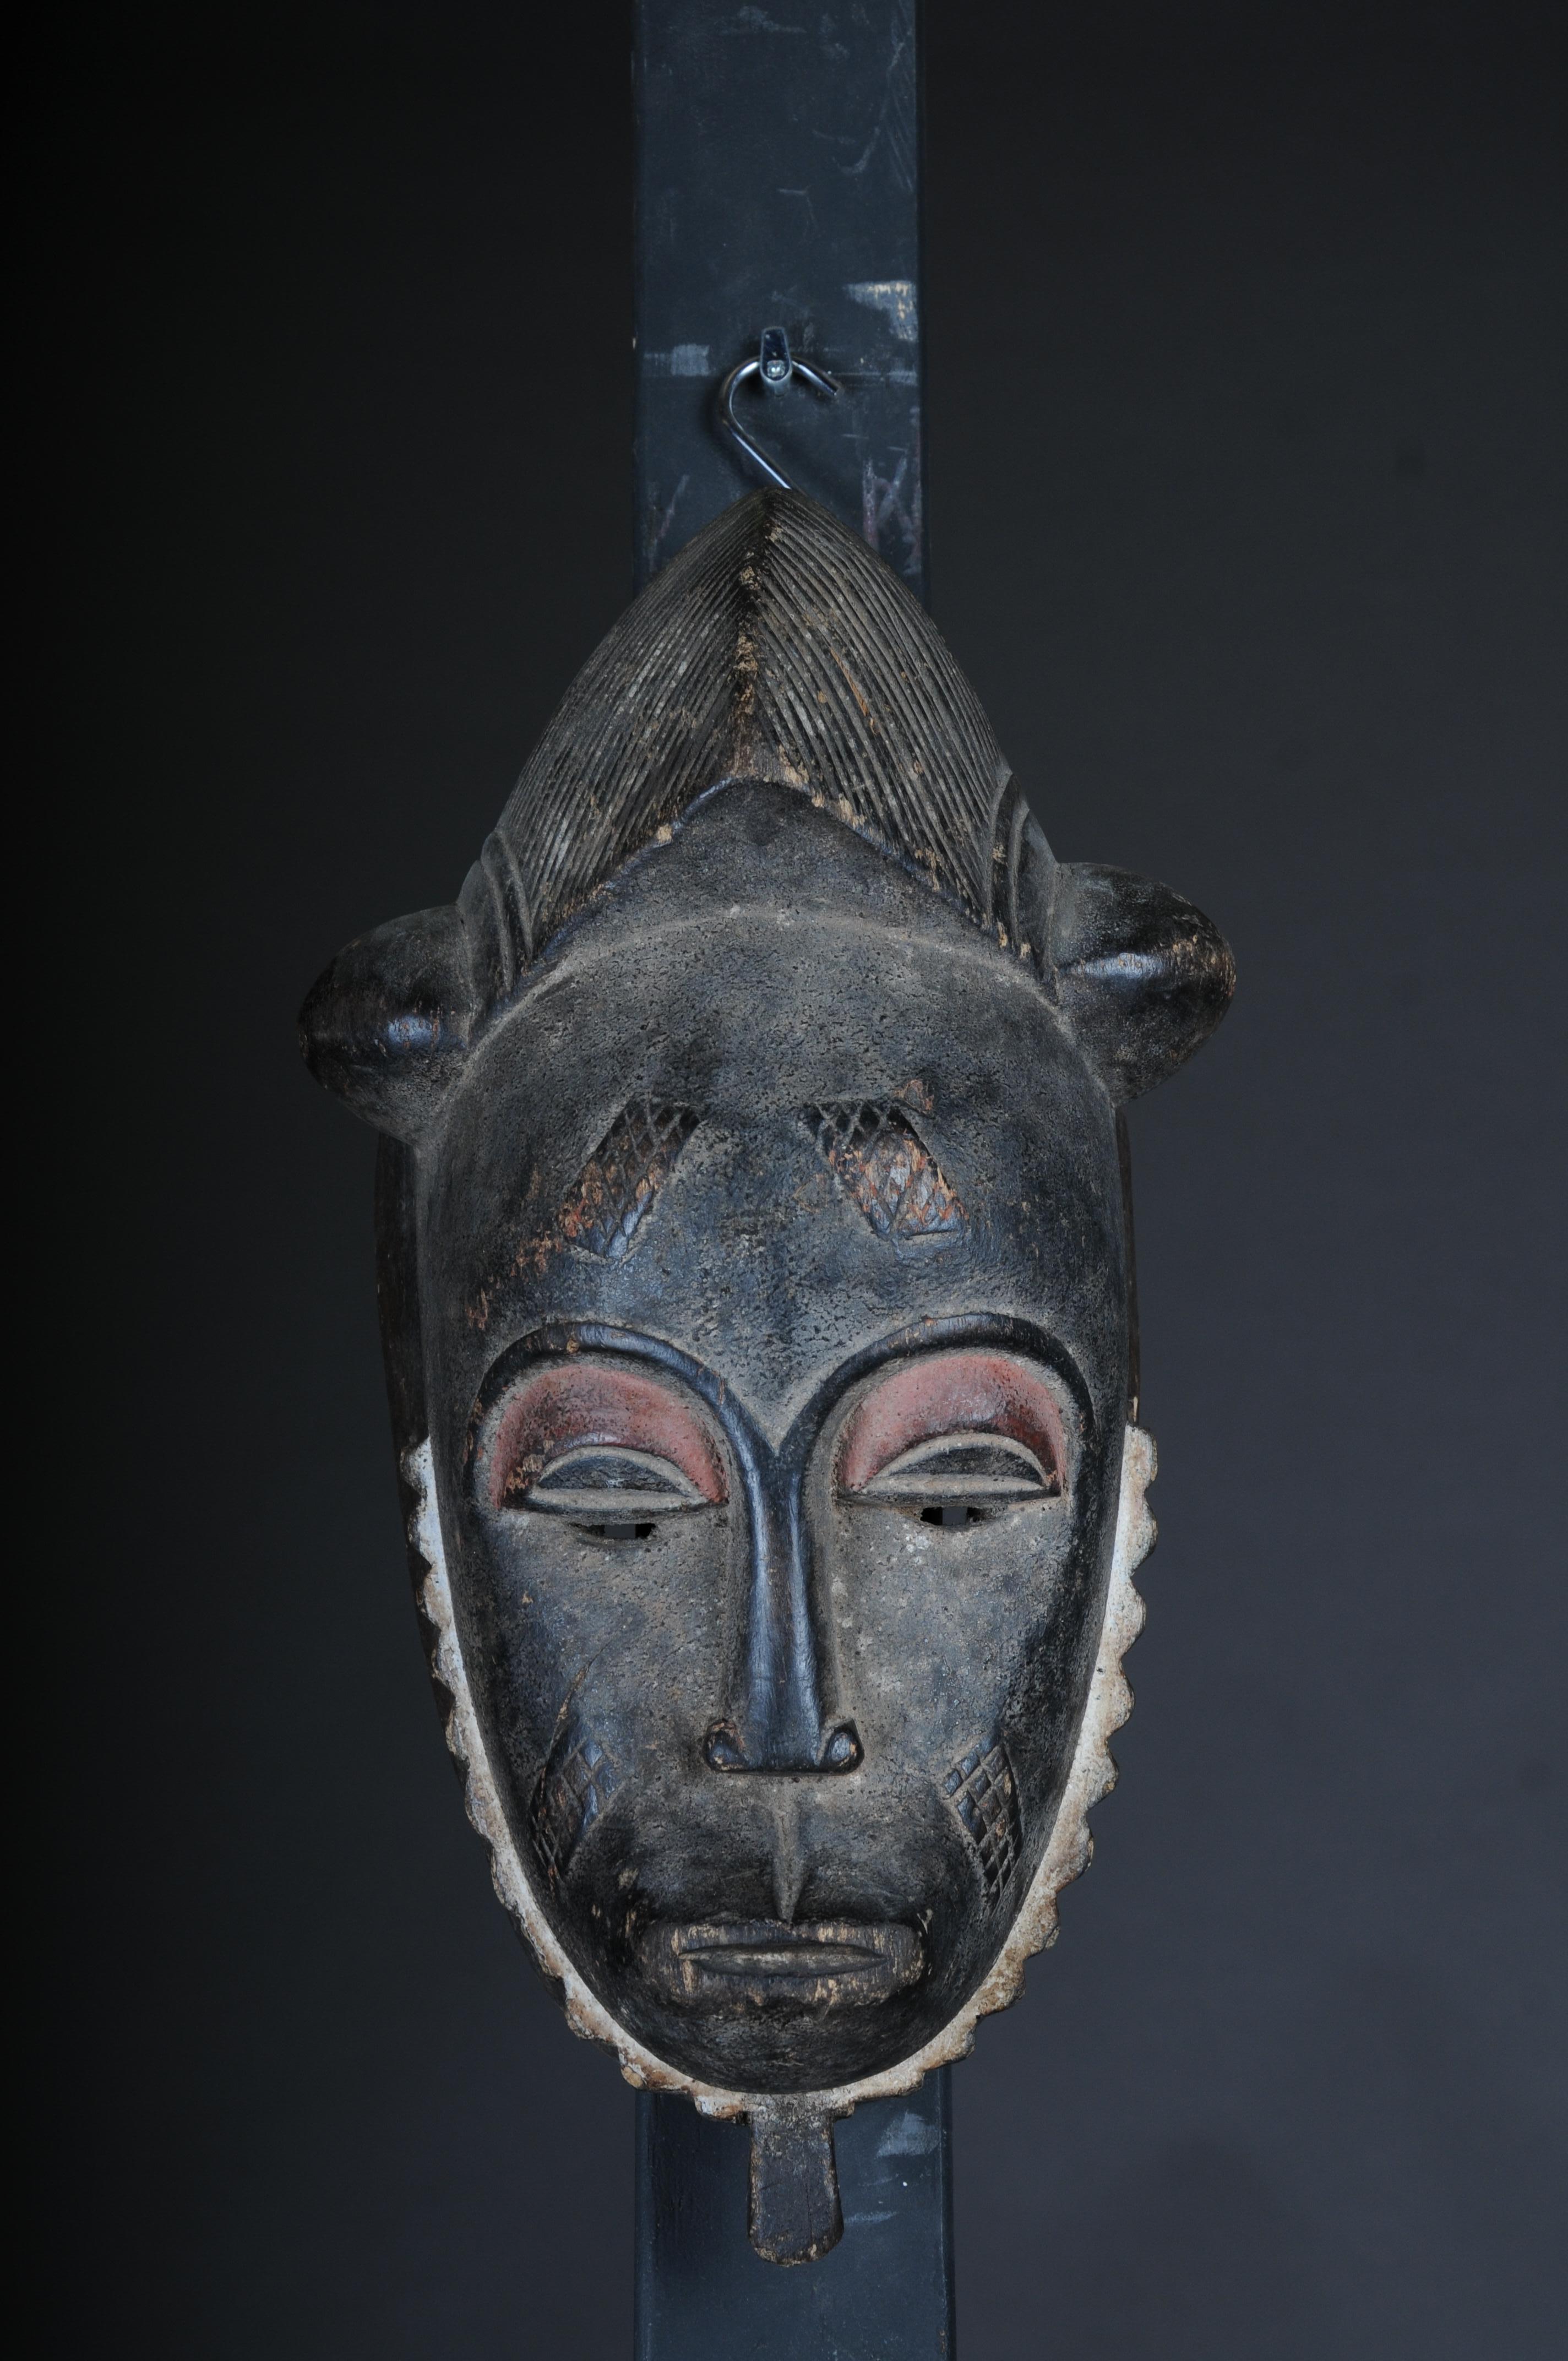 20th Century Antique Carved Wooden Face Mask, African Folk Art. Hangable.Decorative

Solid wood, hand-carved, Africa probably century

The face mask has a device for hanging.

Very decorative timeless work of art.

  Comes from a Berlin private